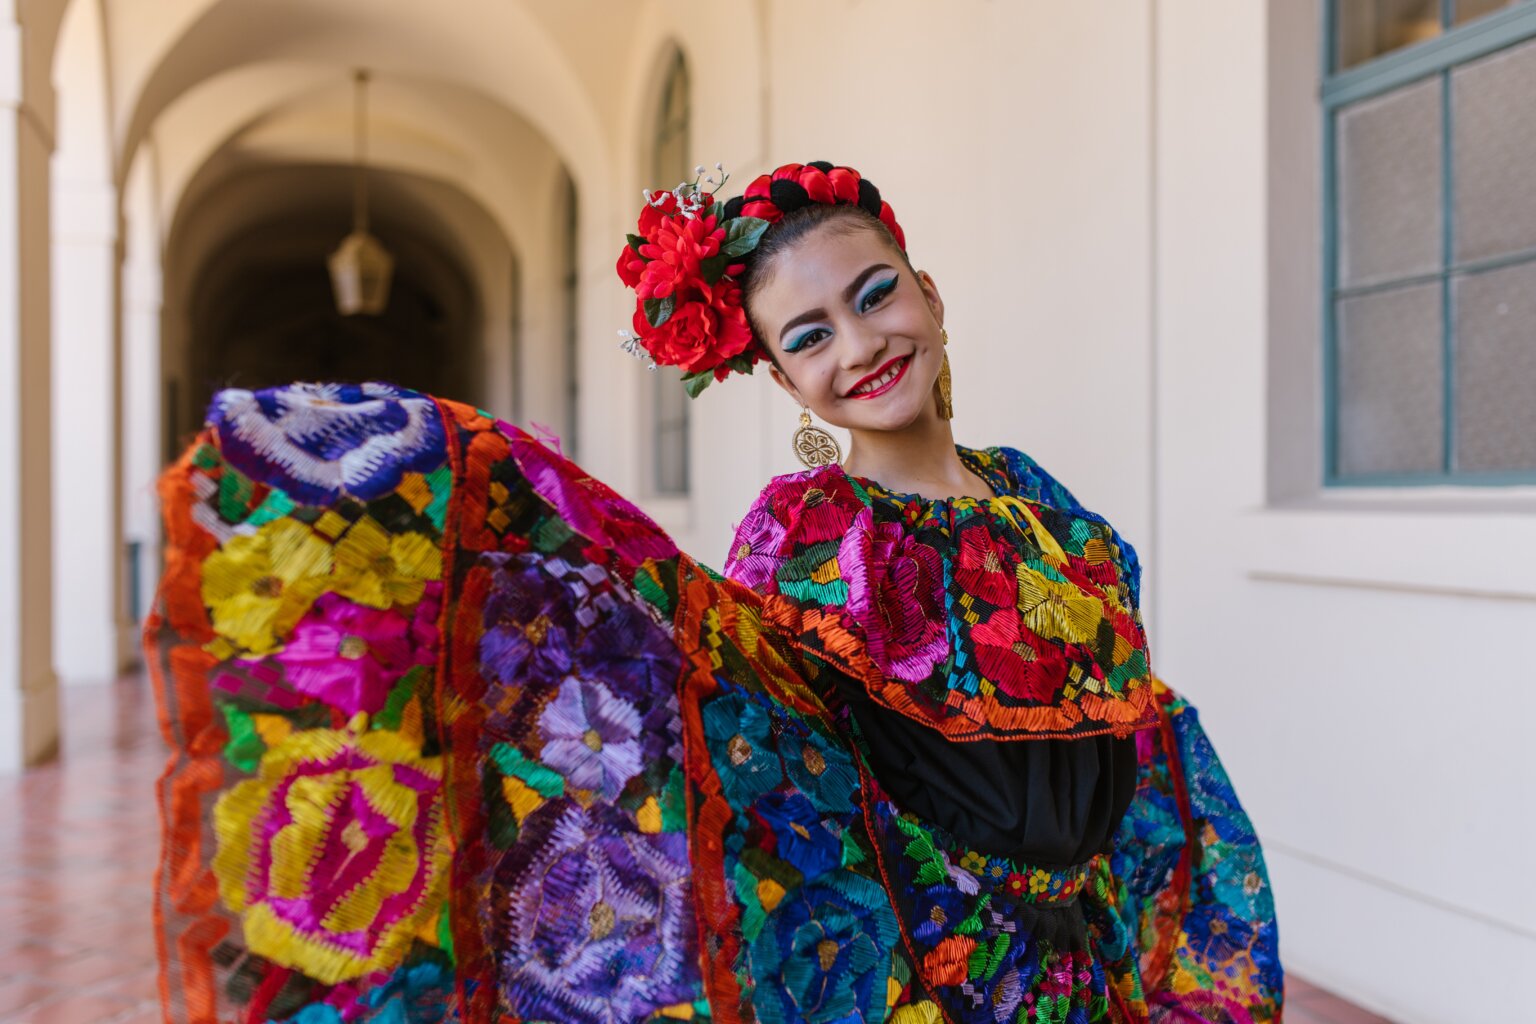 A girl wearing a colorful traditional Mexican dress.